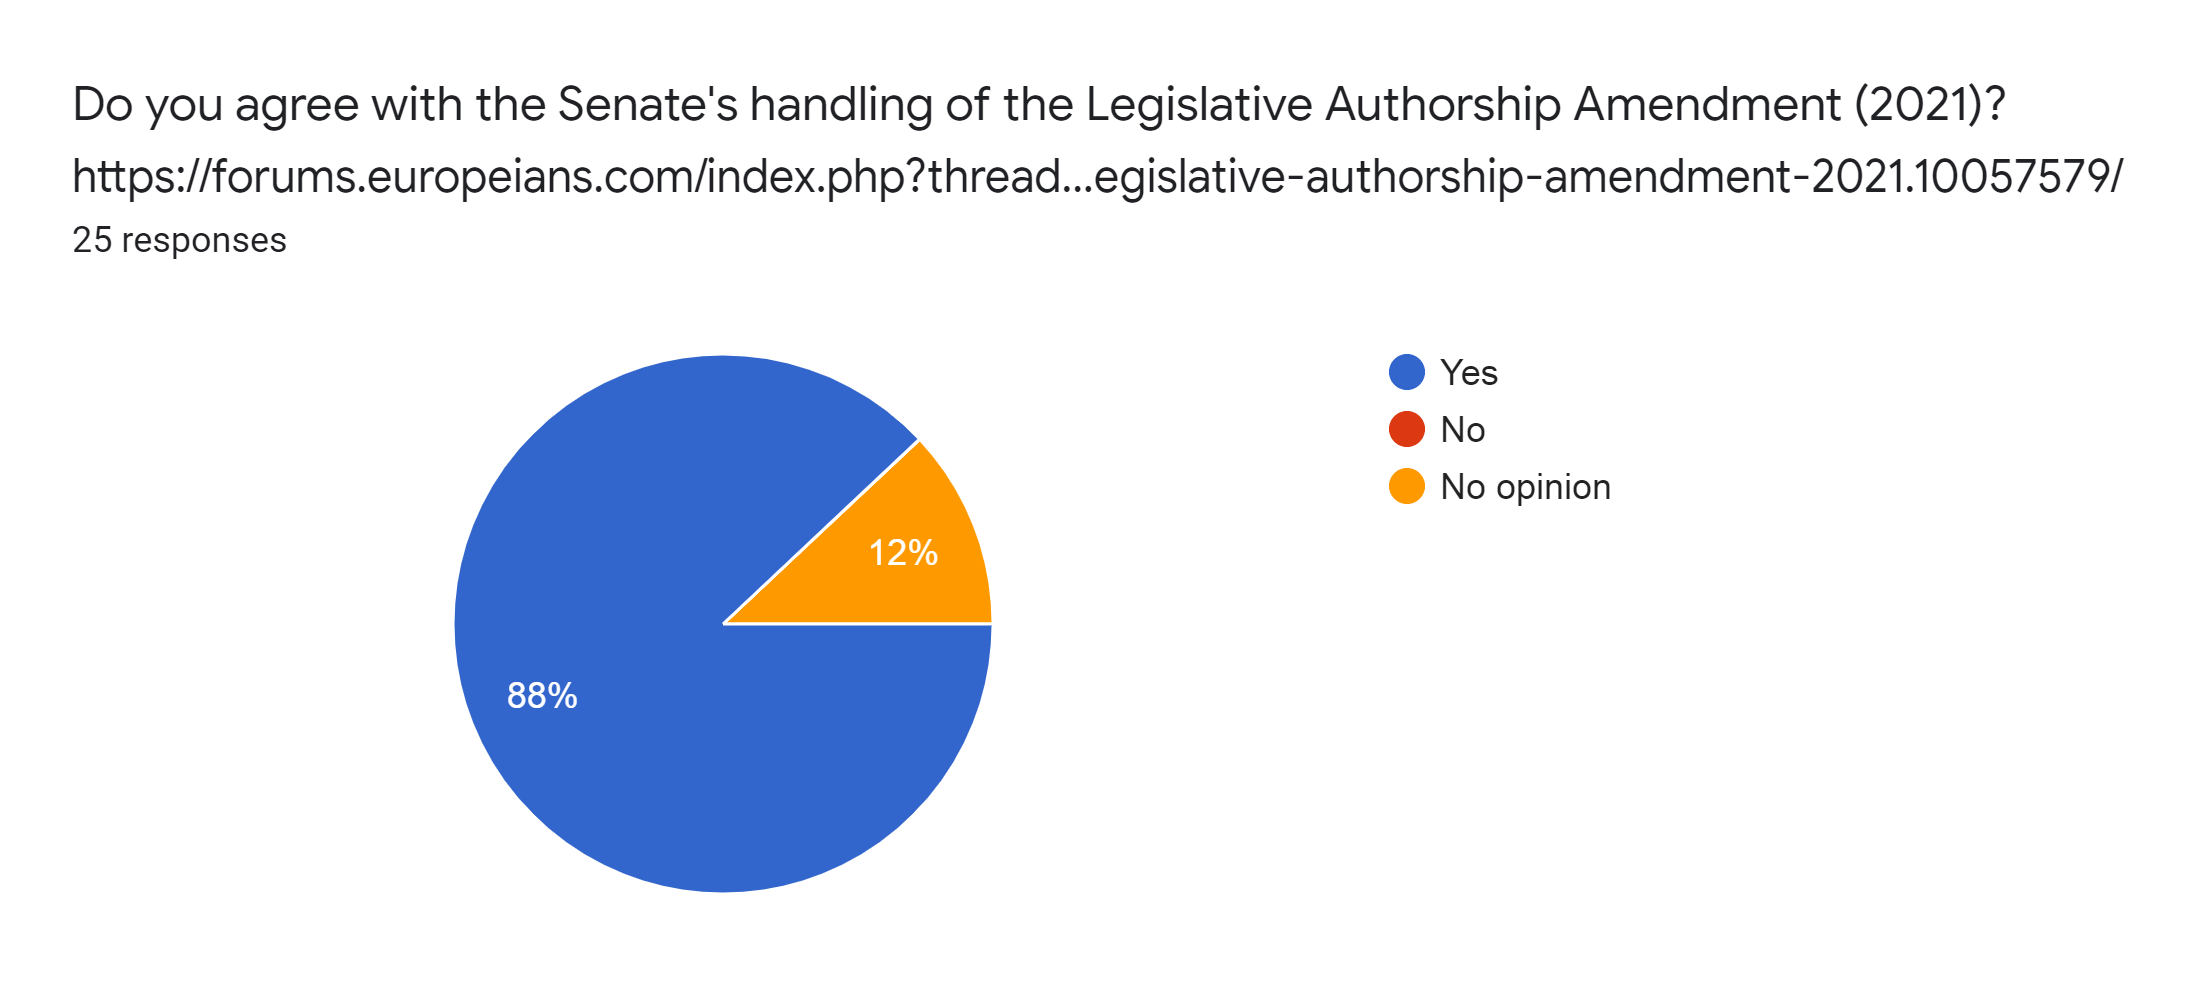 Forms response chart. Question title: Do you agree with the Senate's handling of the Legislative Authorship Amendment (2021)? https://forums.europeians.com/index.php?threads/passed-legislative-authorship-amendment-2021.10057579/. Number of responses: 25 responses.